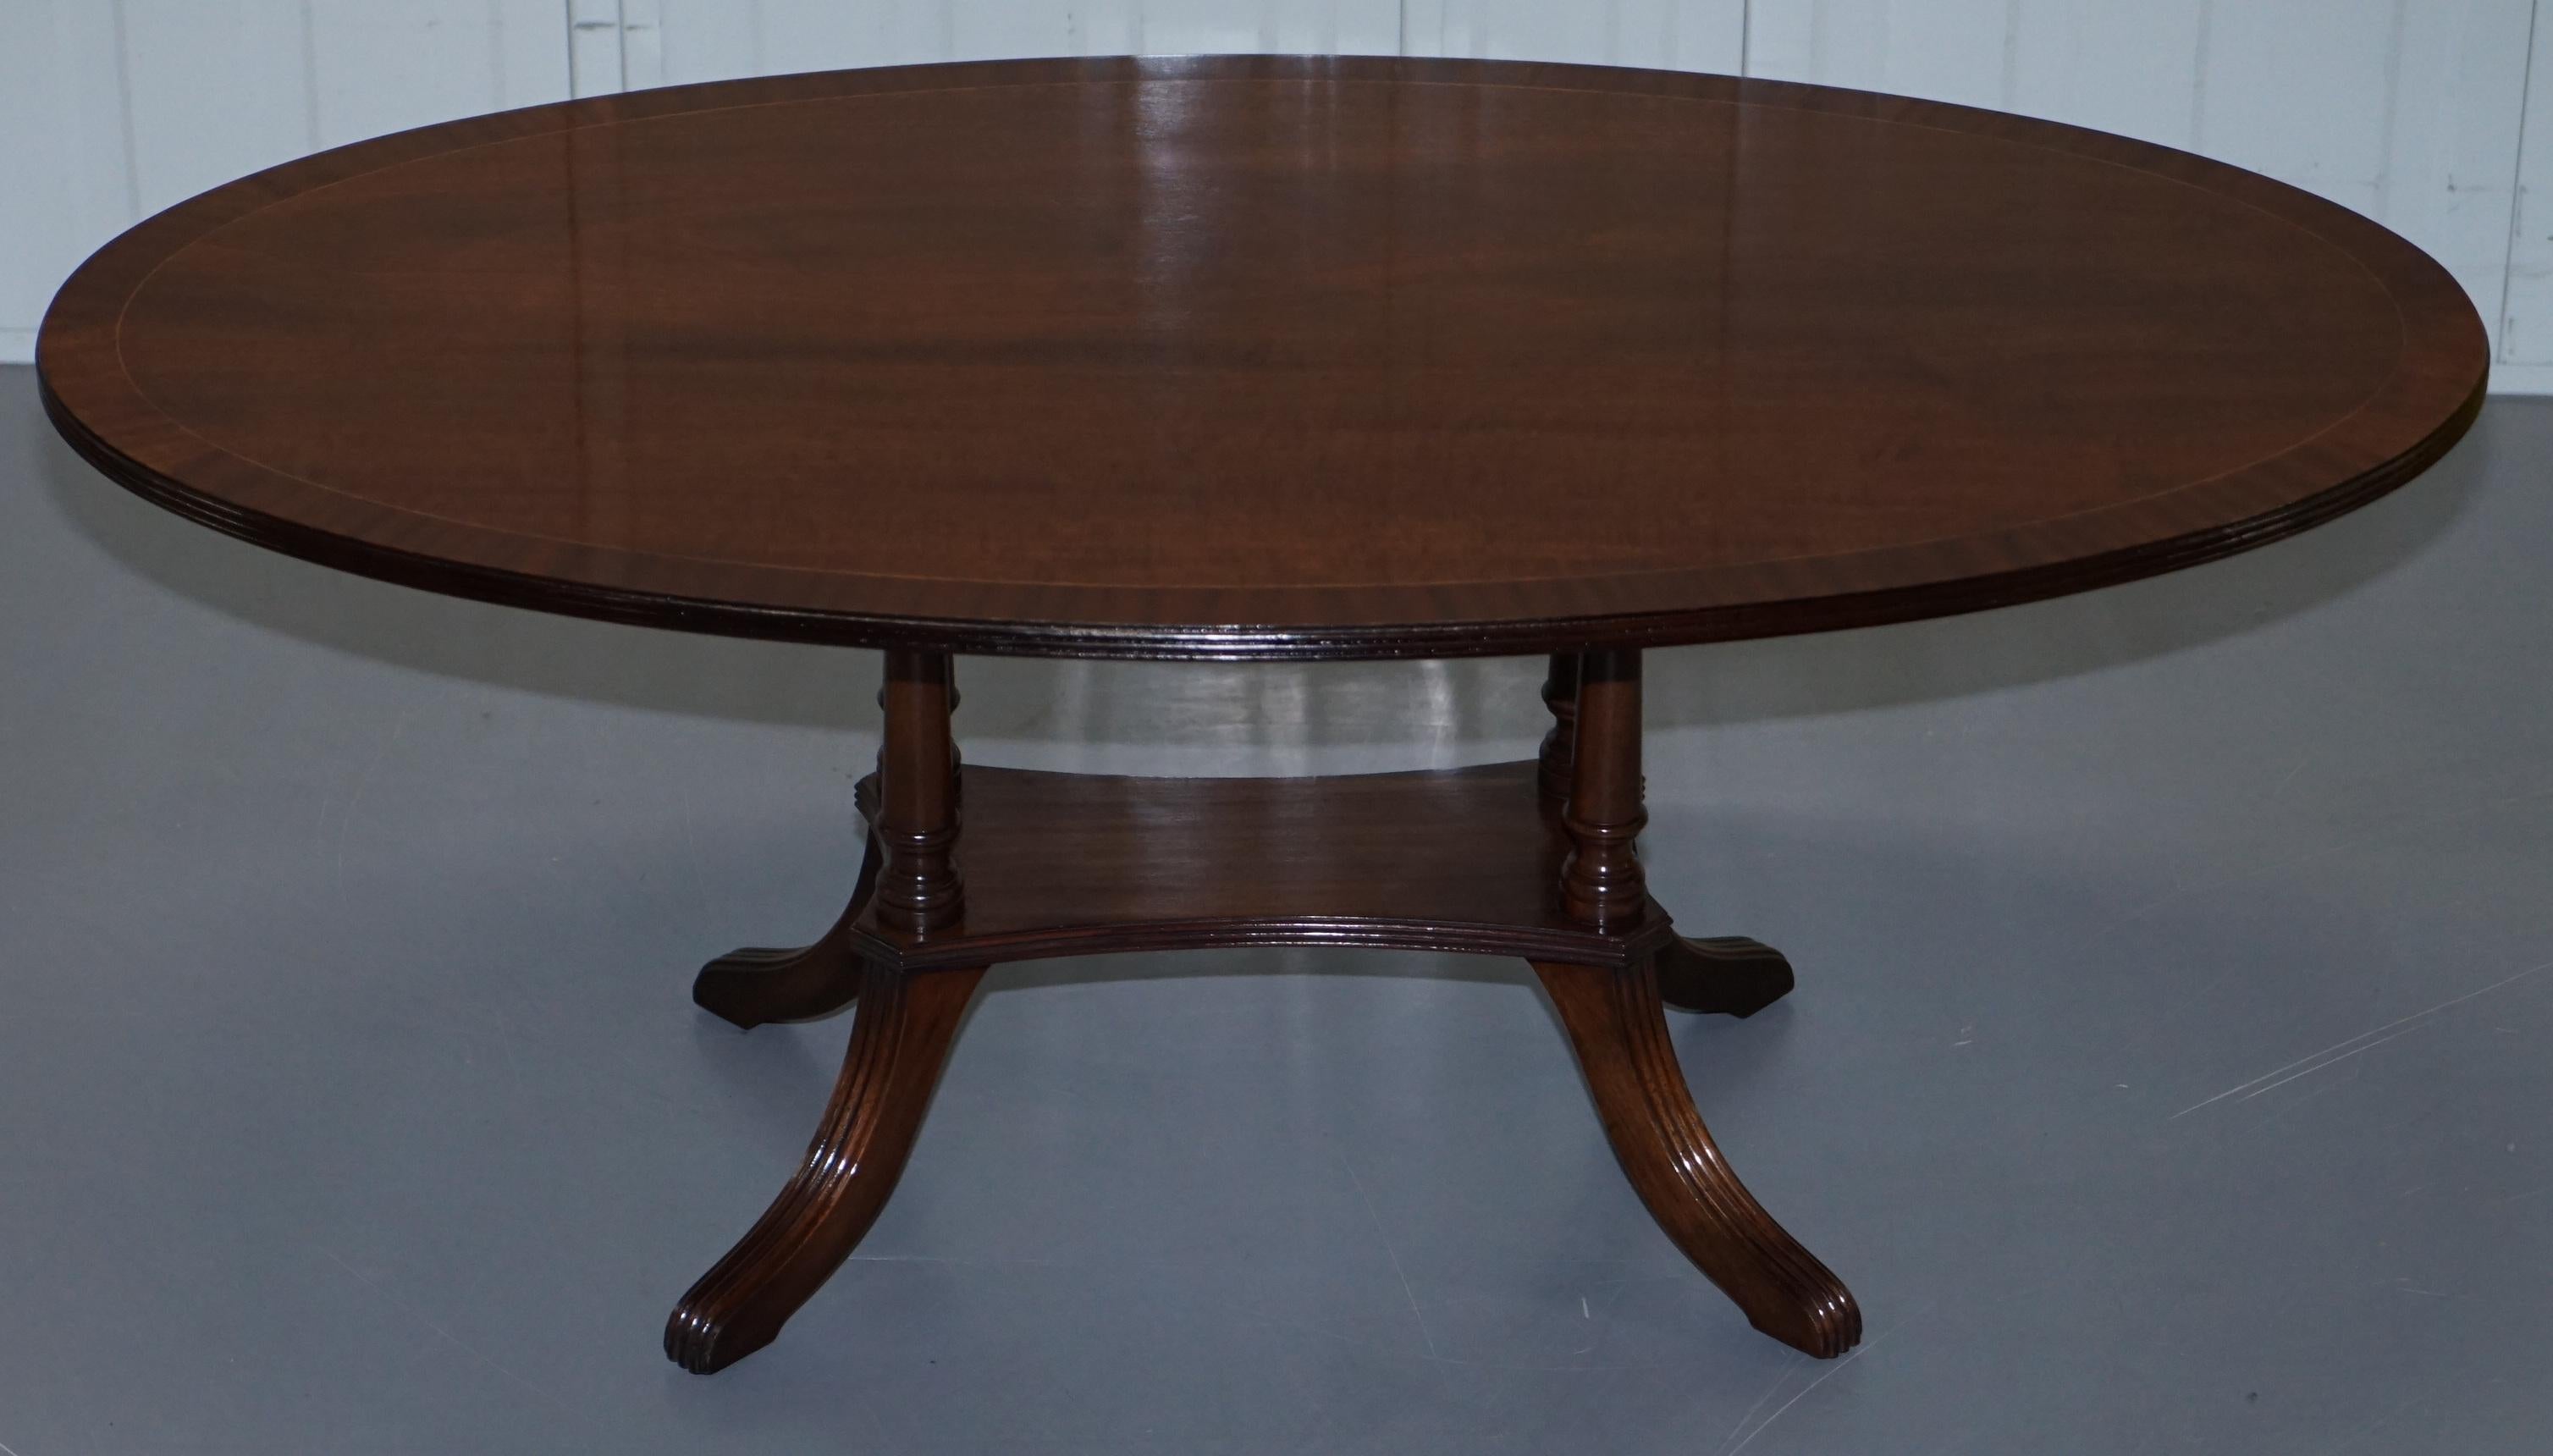 We are delighted to offer for sale this very nice vintage solid flamed mahogany coffee or cocktail table with nicely turned pillared legs

A good looking well made and decorative piece, the table top has a nice flamed mahogany finish with box wood